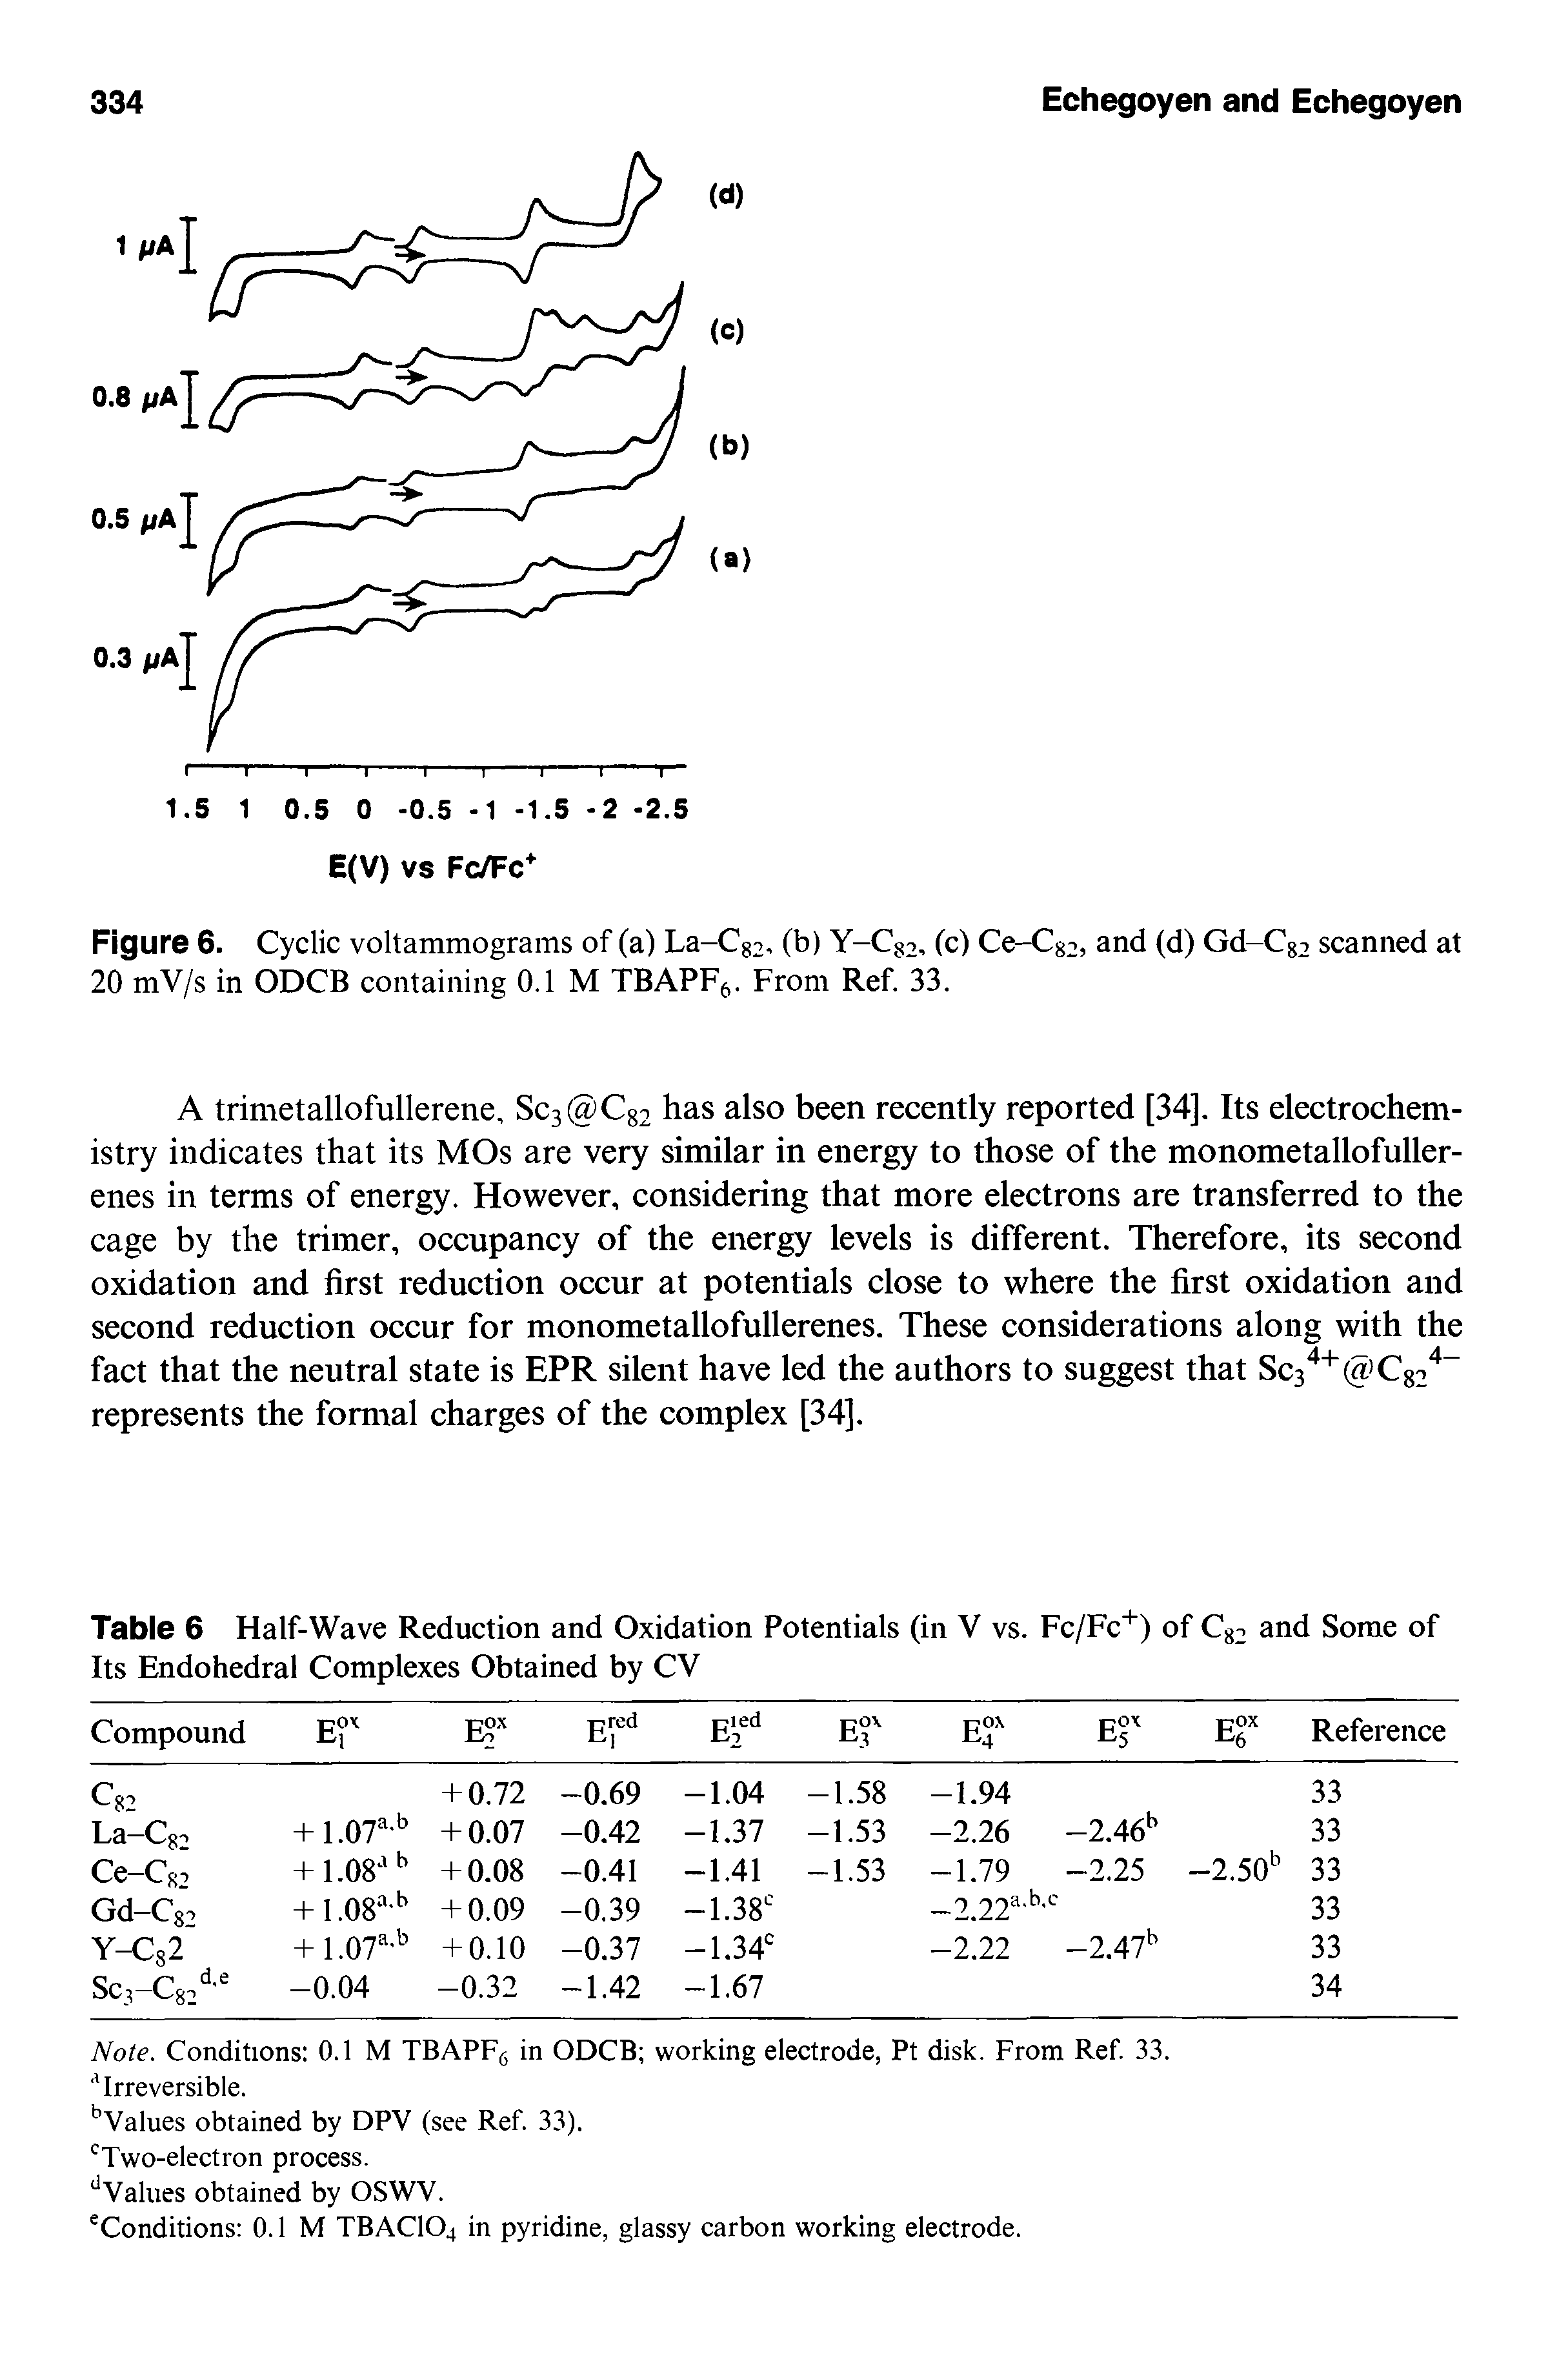 Table 6 Half-Wave Reduction and Oxidation Potentials (in V vs. Fc/Fc ) of Q2 and Some of Its Endohedral Complexes Obtained by CV...